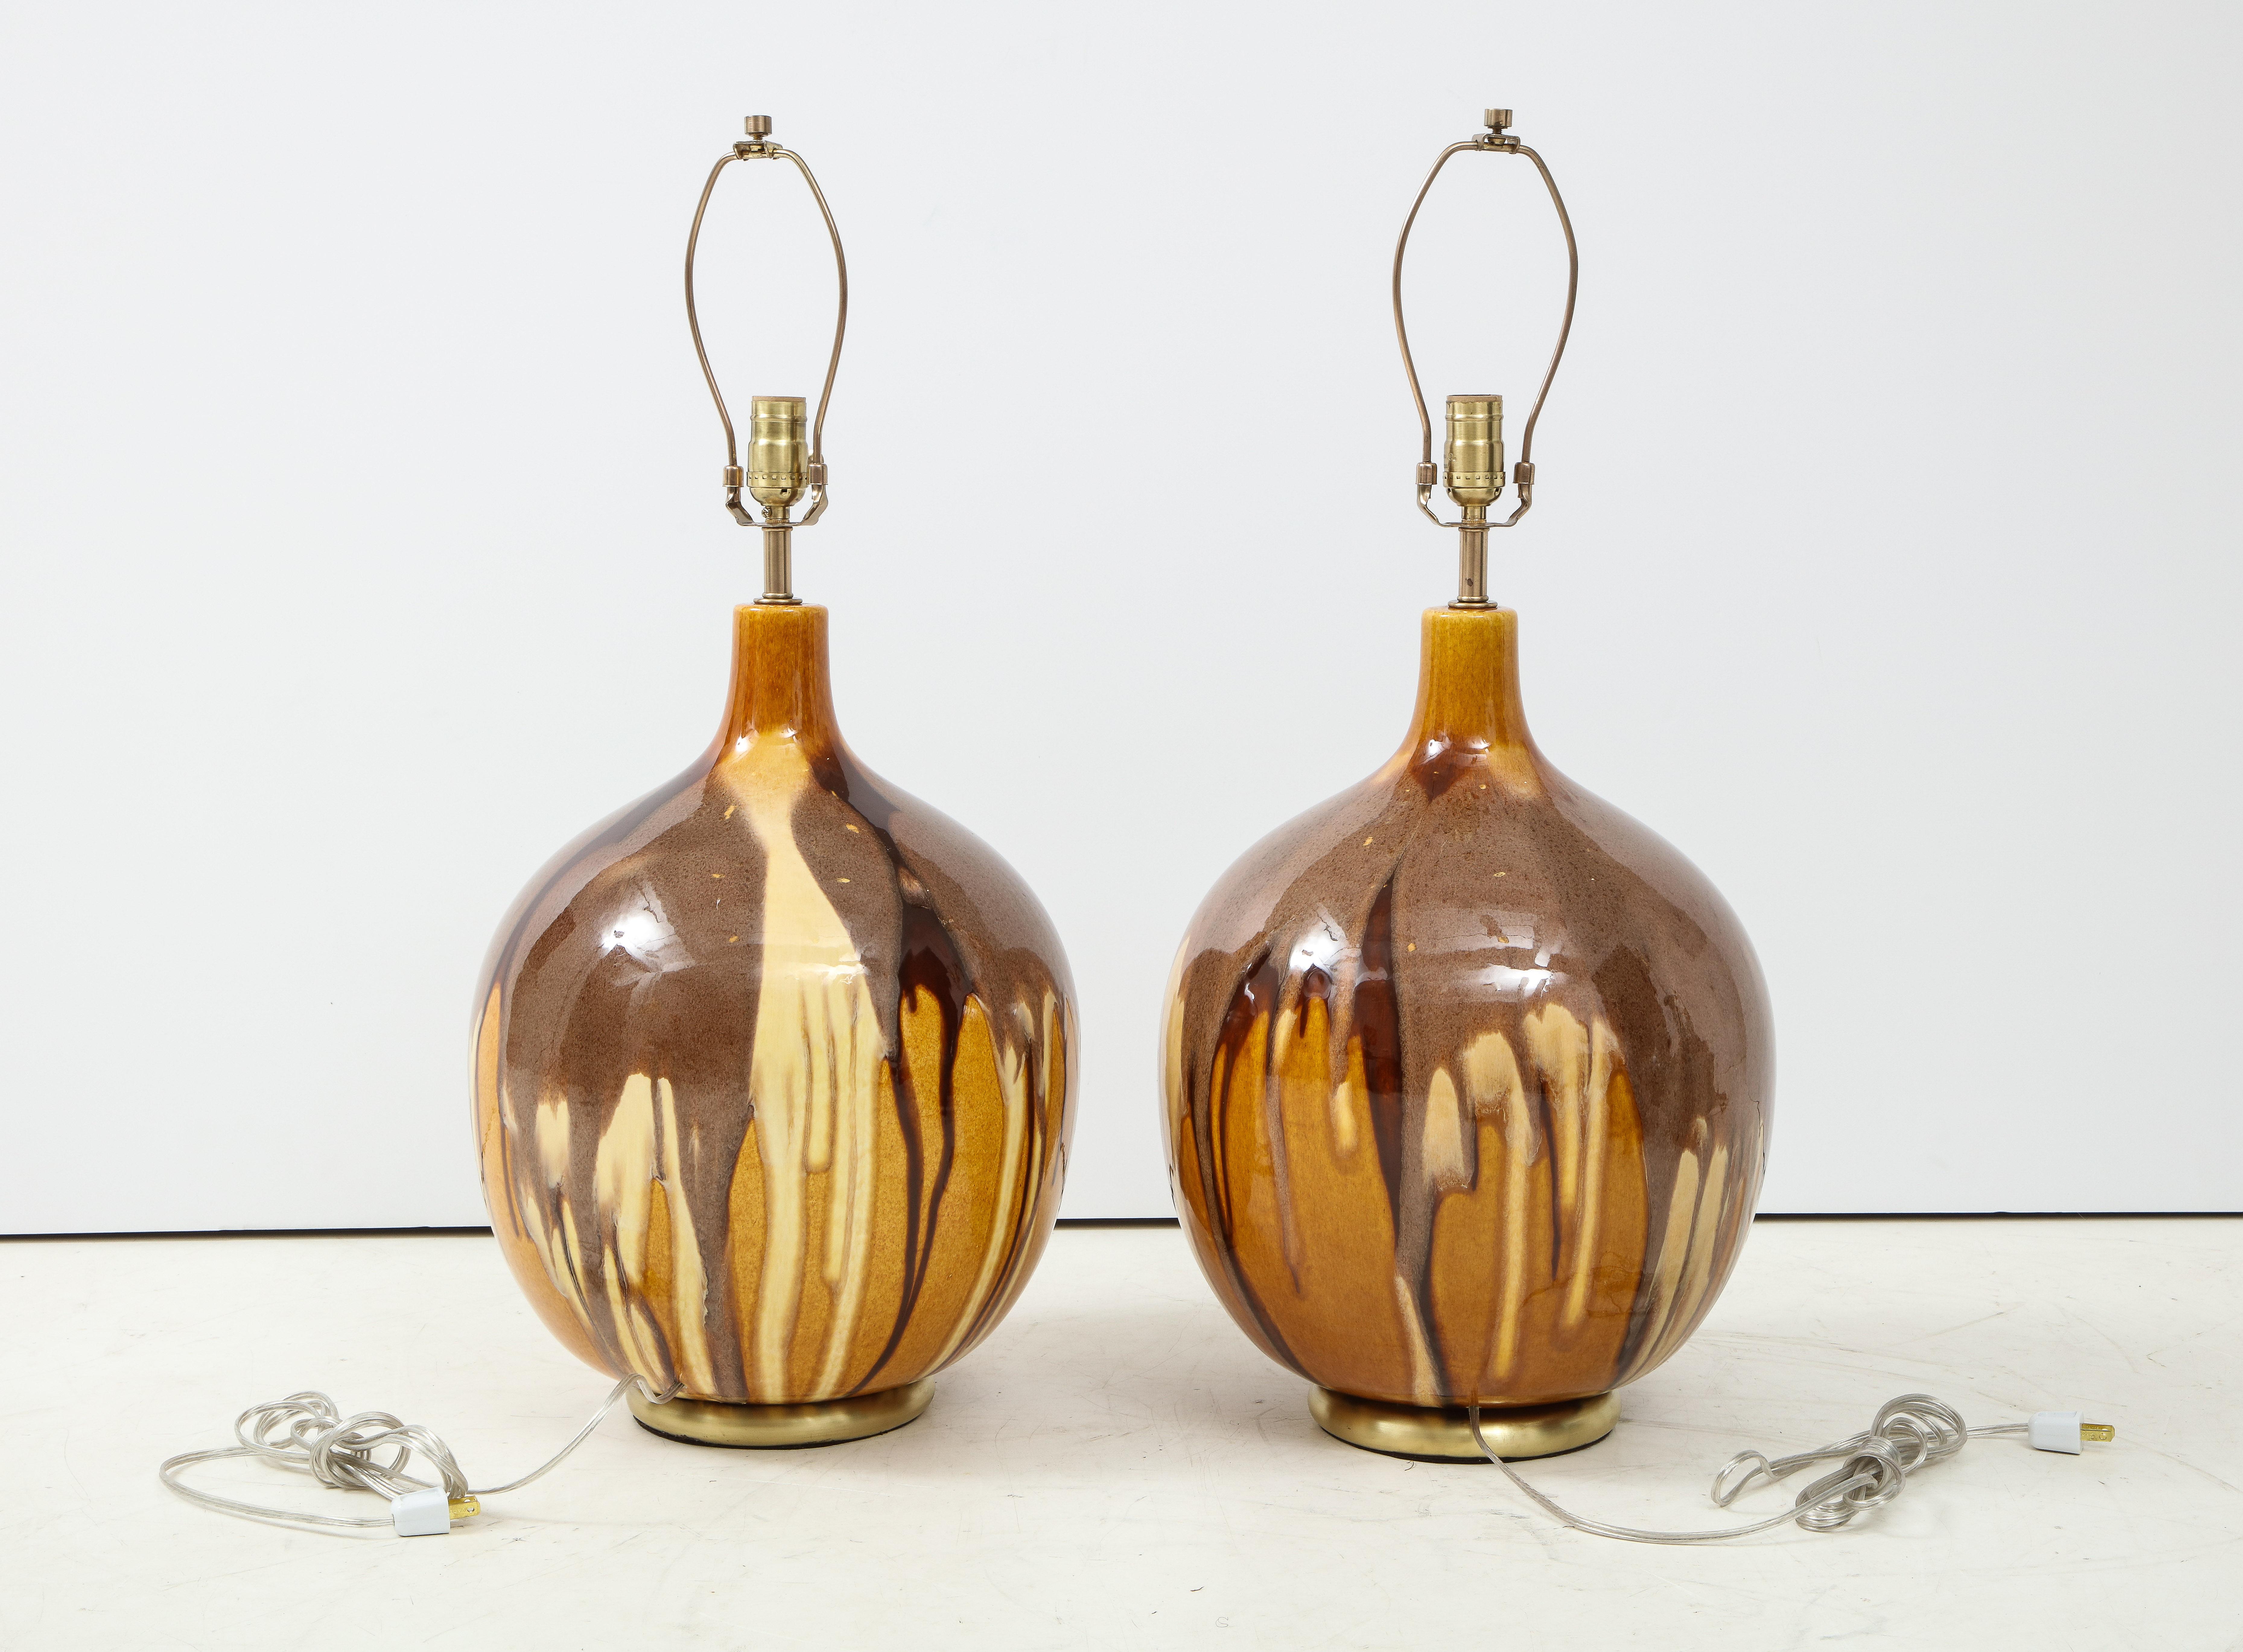 Pair of Italian midcentury earth tone glazed ceramic lamps featuring ochres and Sienna on aged brass bases, circa 1960s. Rewired for use in the USA, 100W max bulbs.